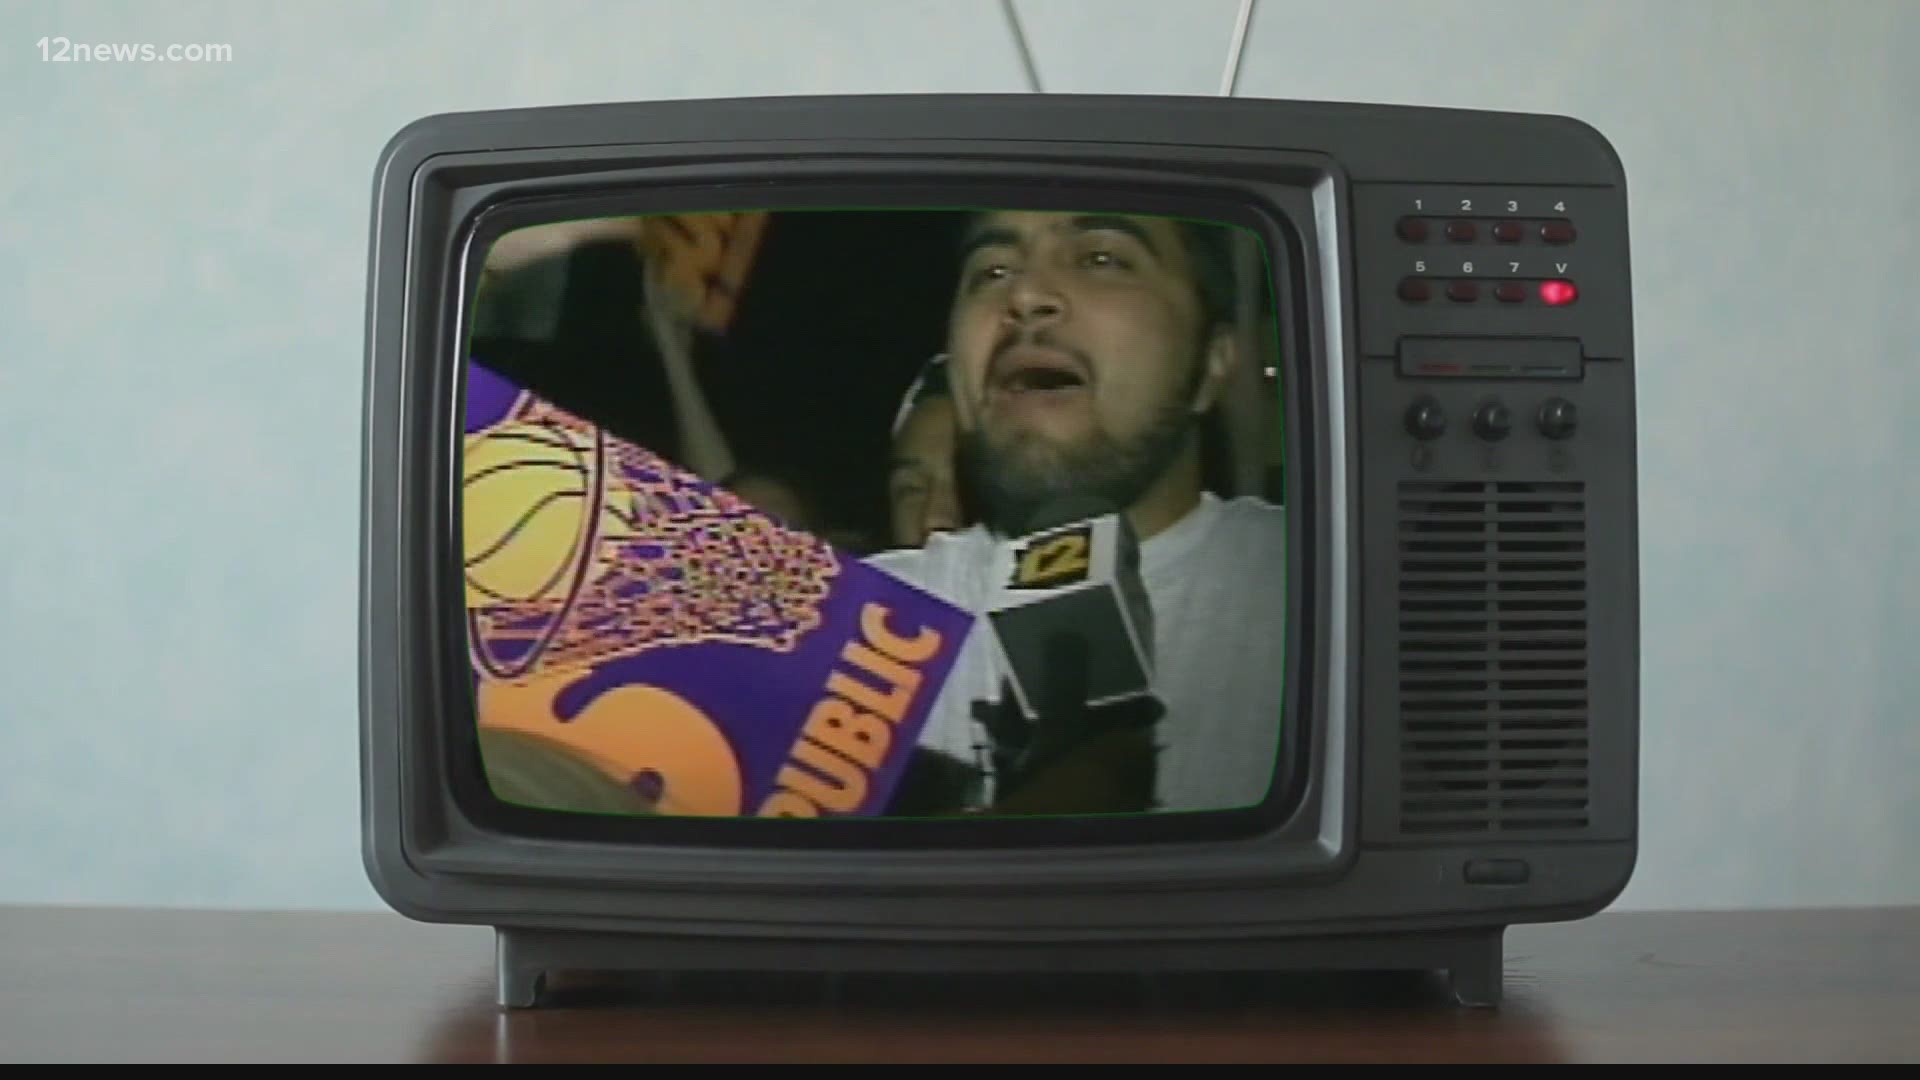 As the team competes in the NBA Finals, we take a look back at the Phoenix Suns mania in 1993. Will Pitts has the story.